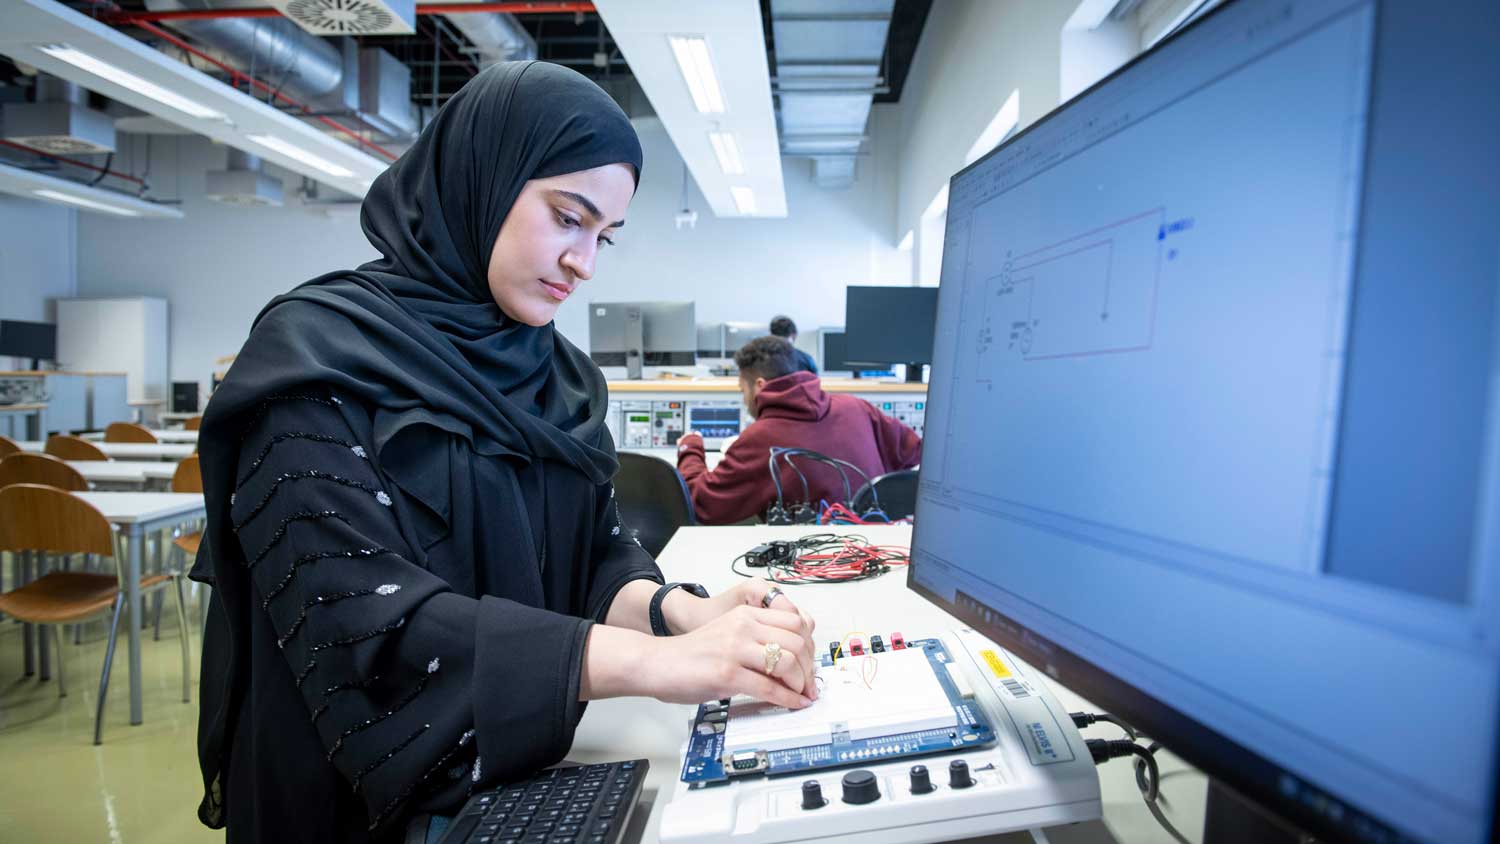 A student builds an electric circuit at the Texas A&M Qatar campus